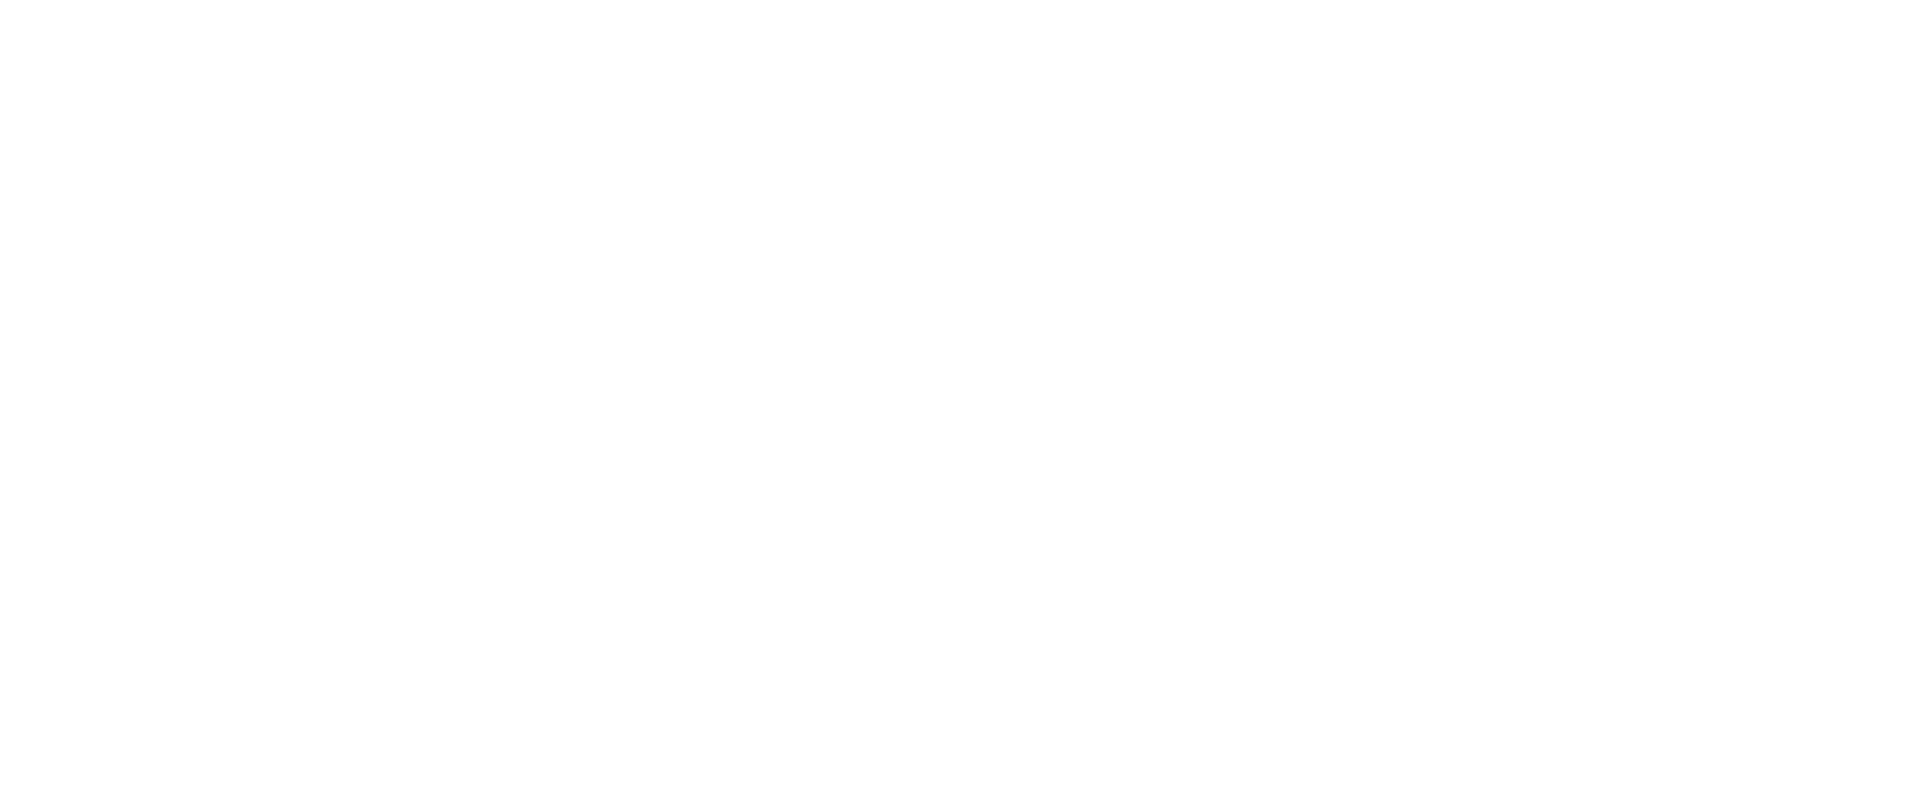 Management philosophy We take pleasure in the trust of our customers and contribute to the realisation of a prosperous society through our creative activities.1. Customer satisfaction is trust. 2. We contribute to the realisation of a prosperous society through creative activities.